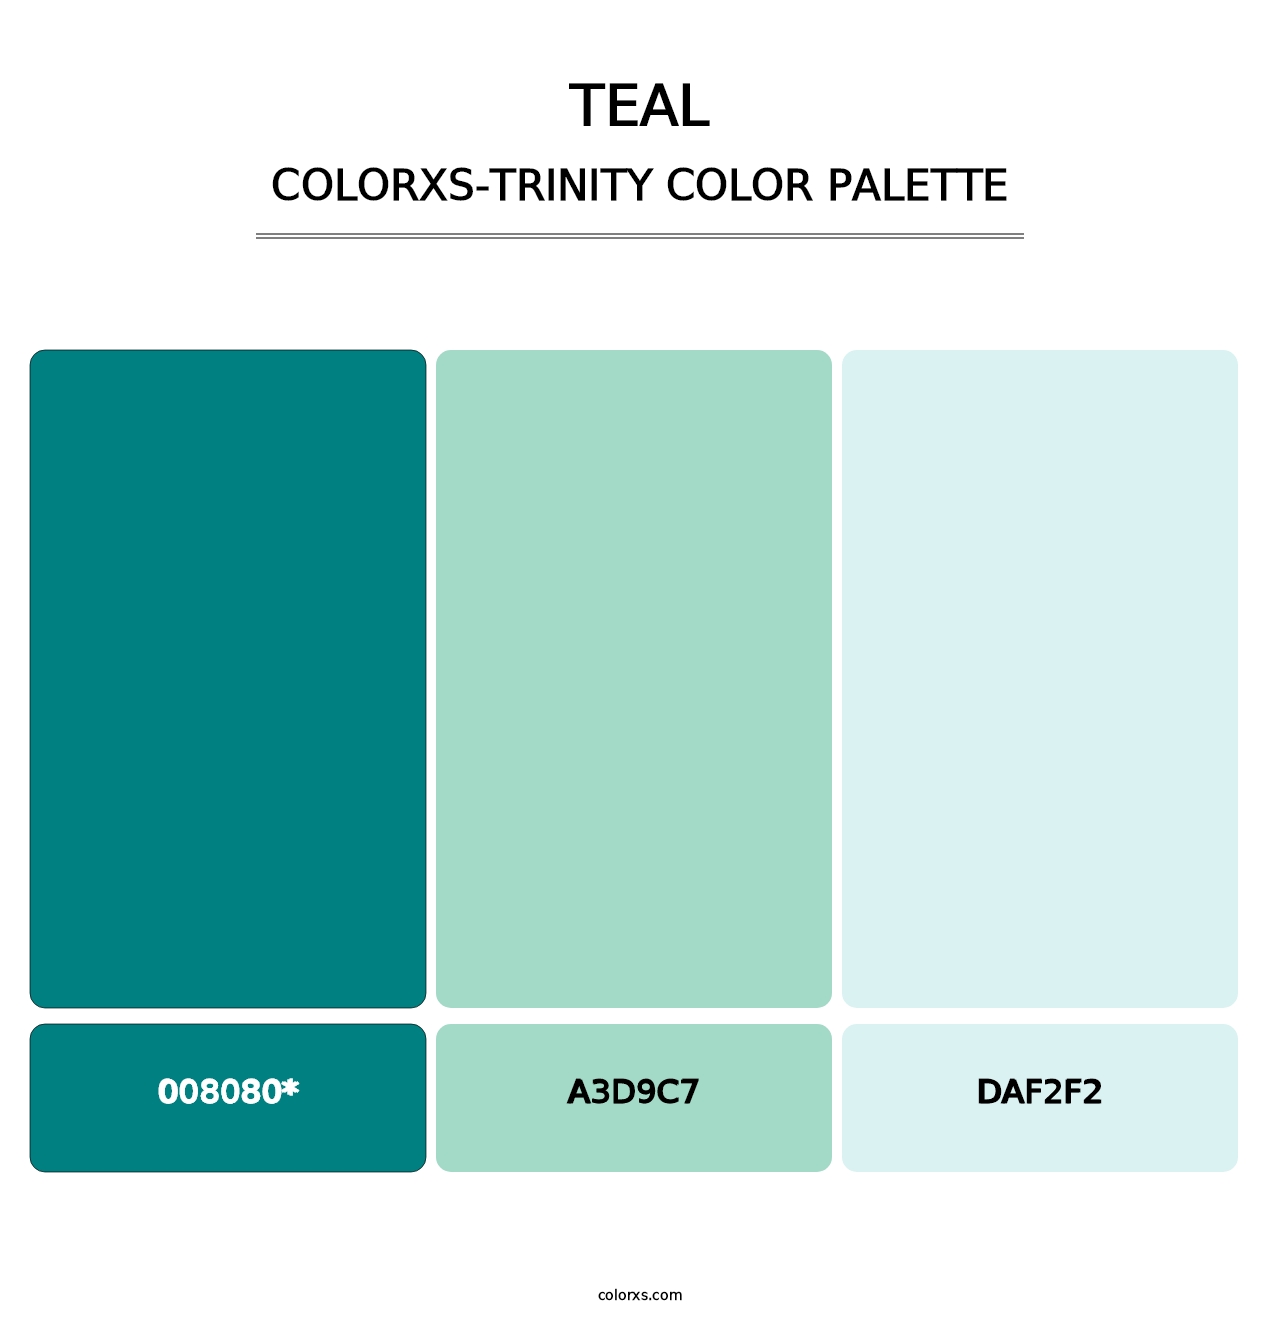 Teal - Colorxs Trinity Palette